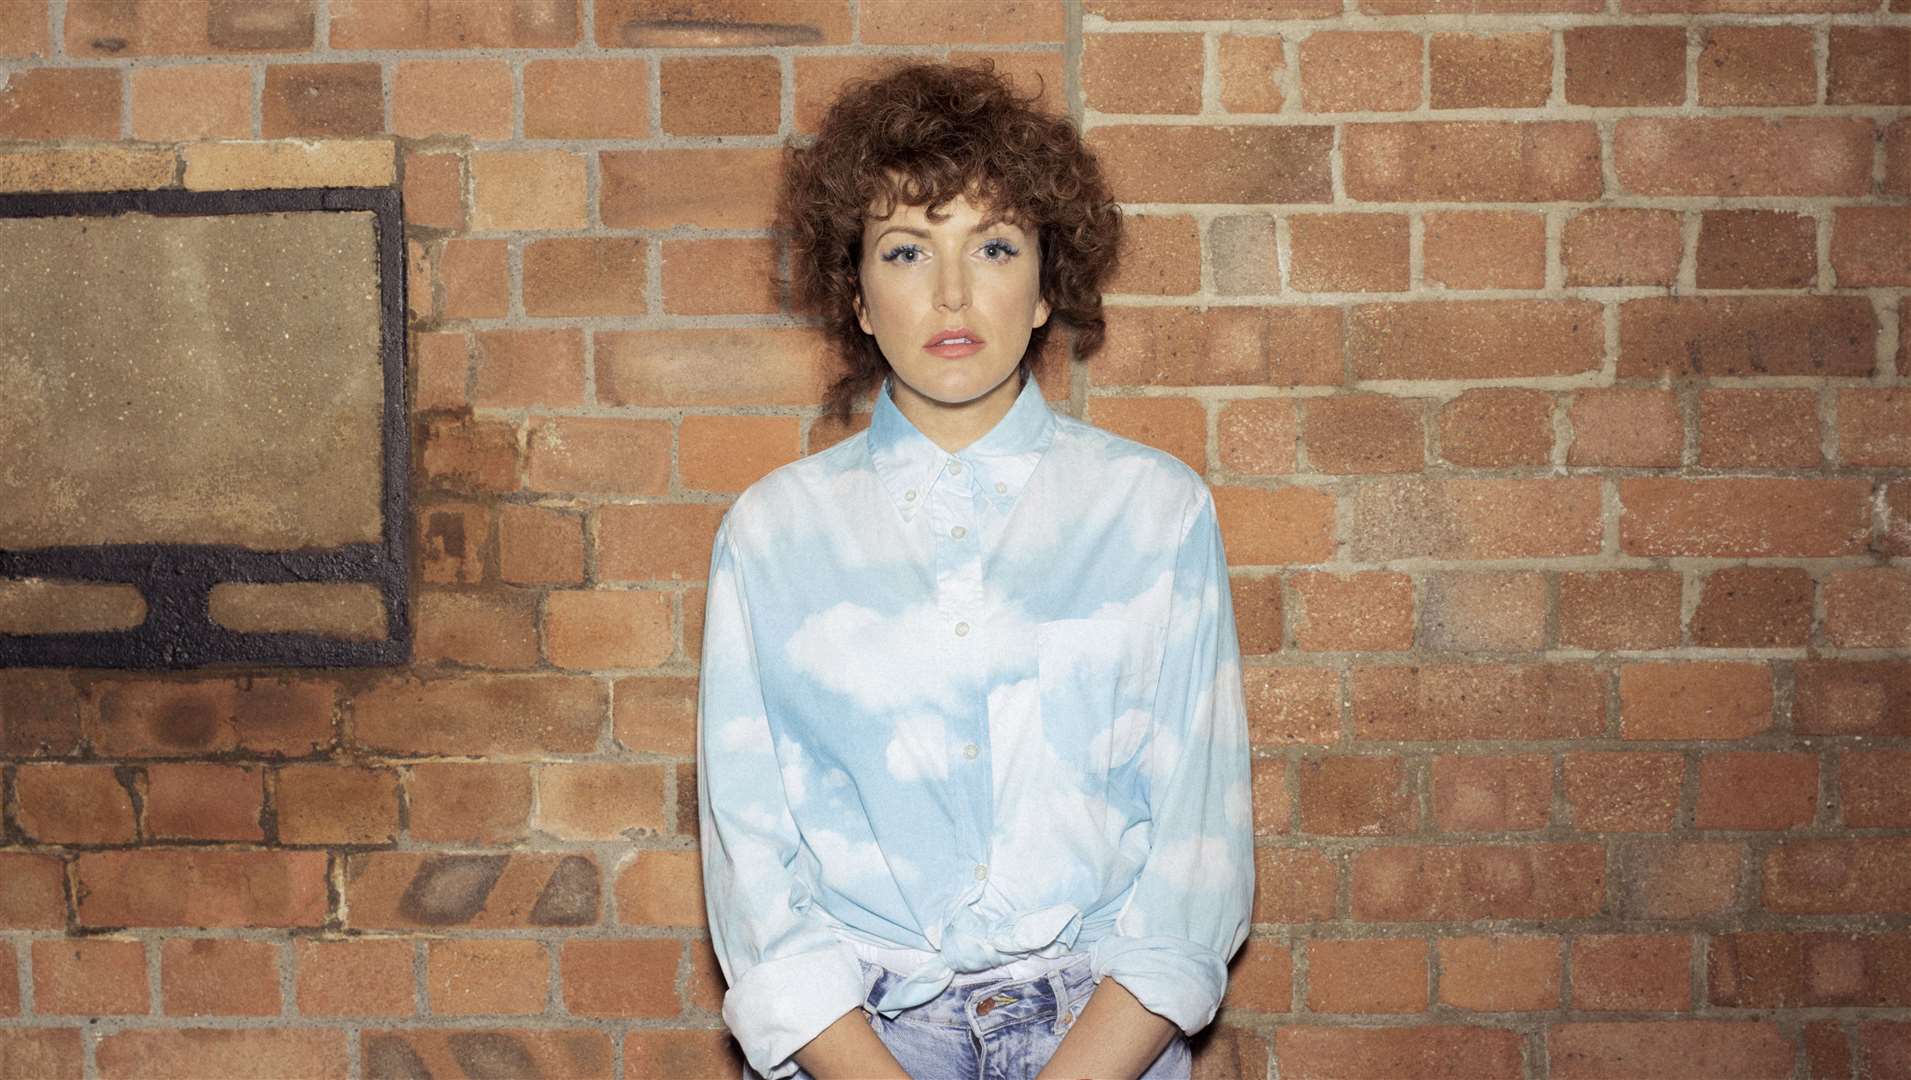 Annie Mac will be performing live at Dreamland in 2023